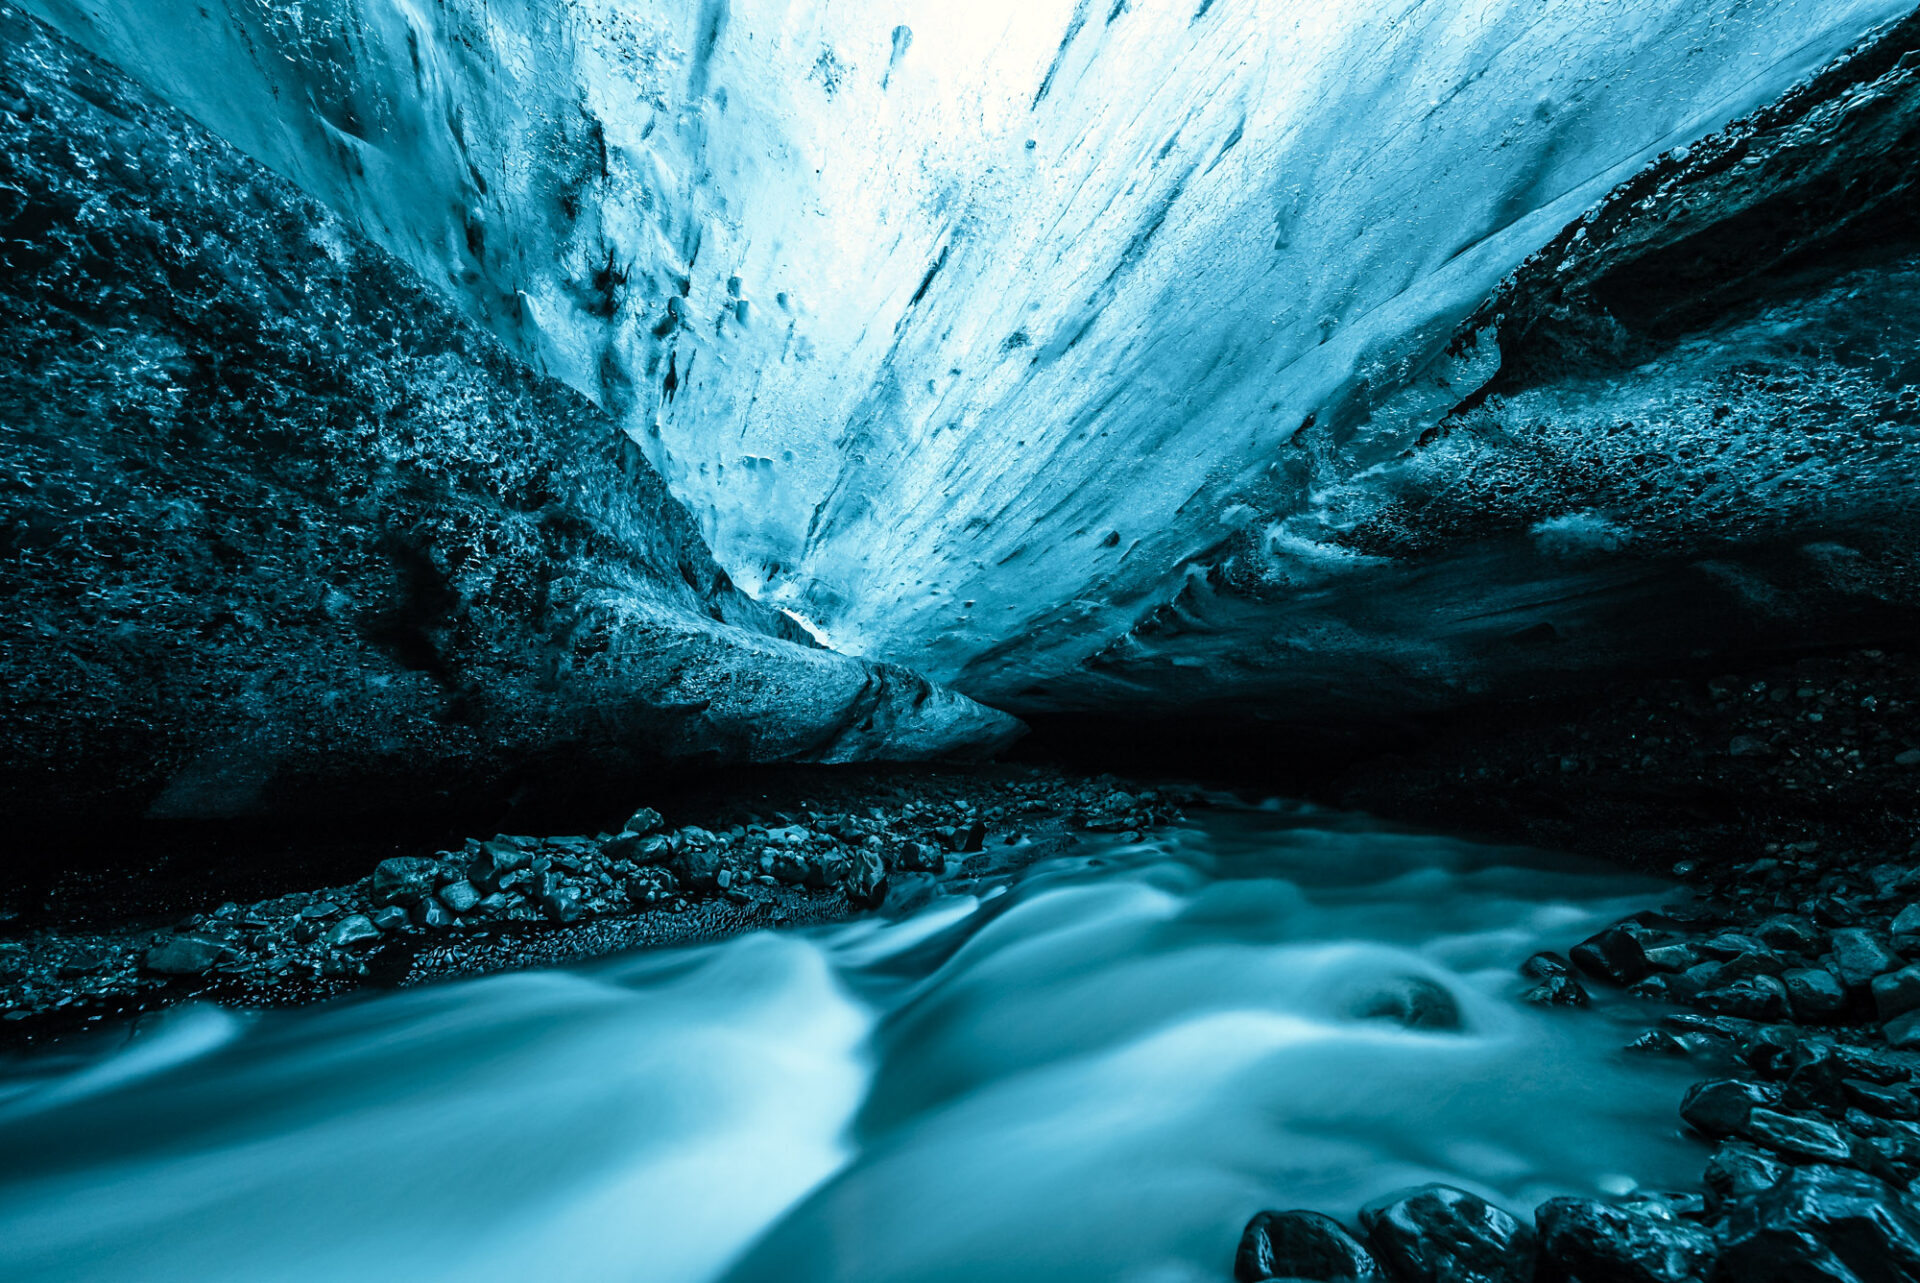 Glacier ice cave in South Iceland